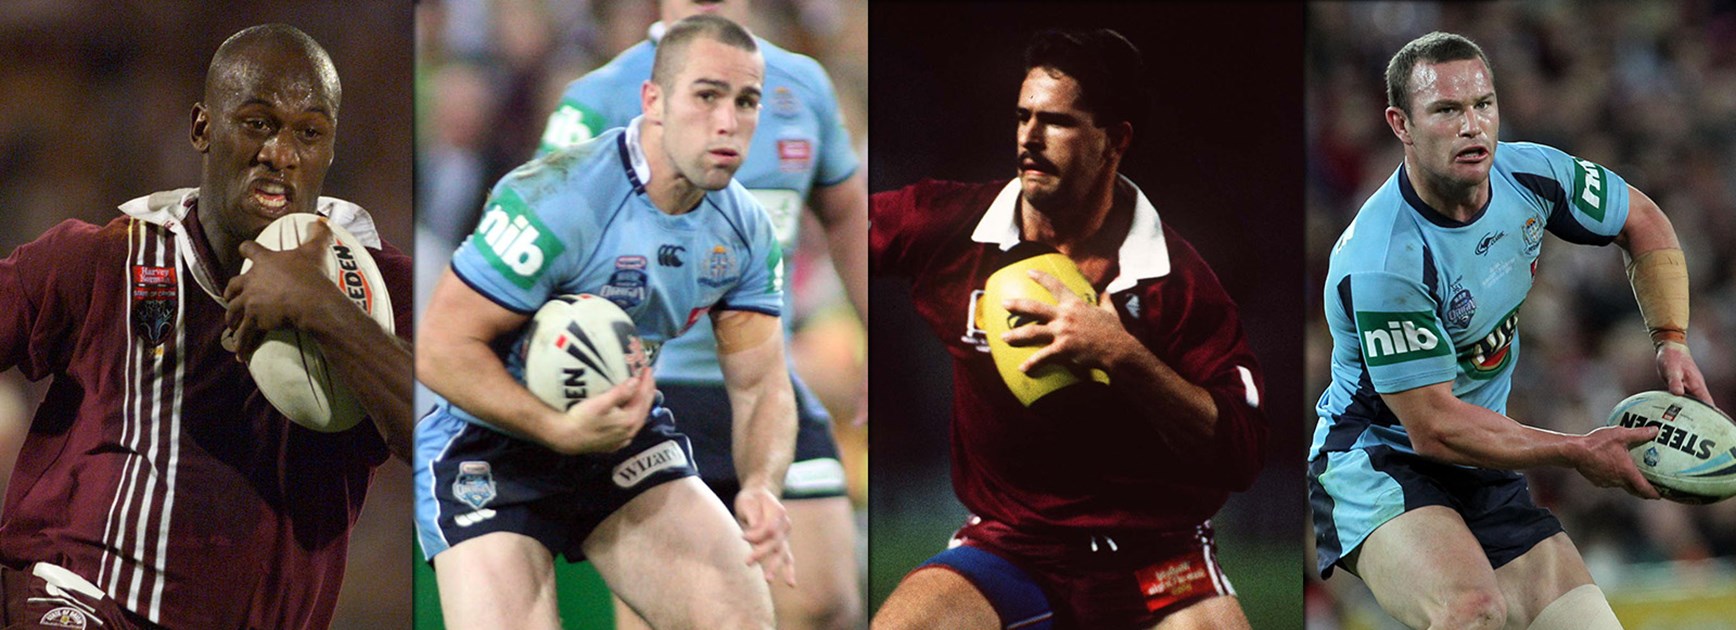 NRL.com caught up with former State of Origin players to find out where they were when they found out they were making their debut.